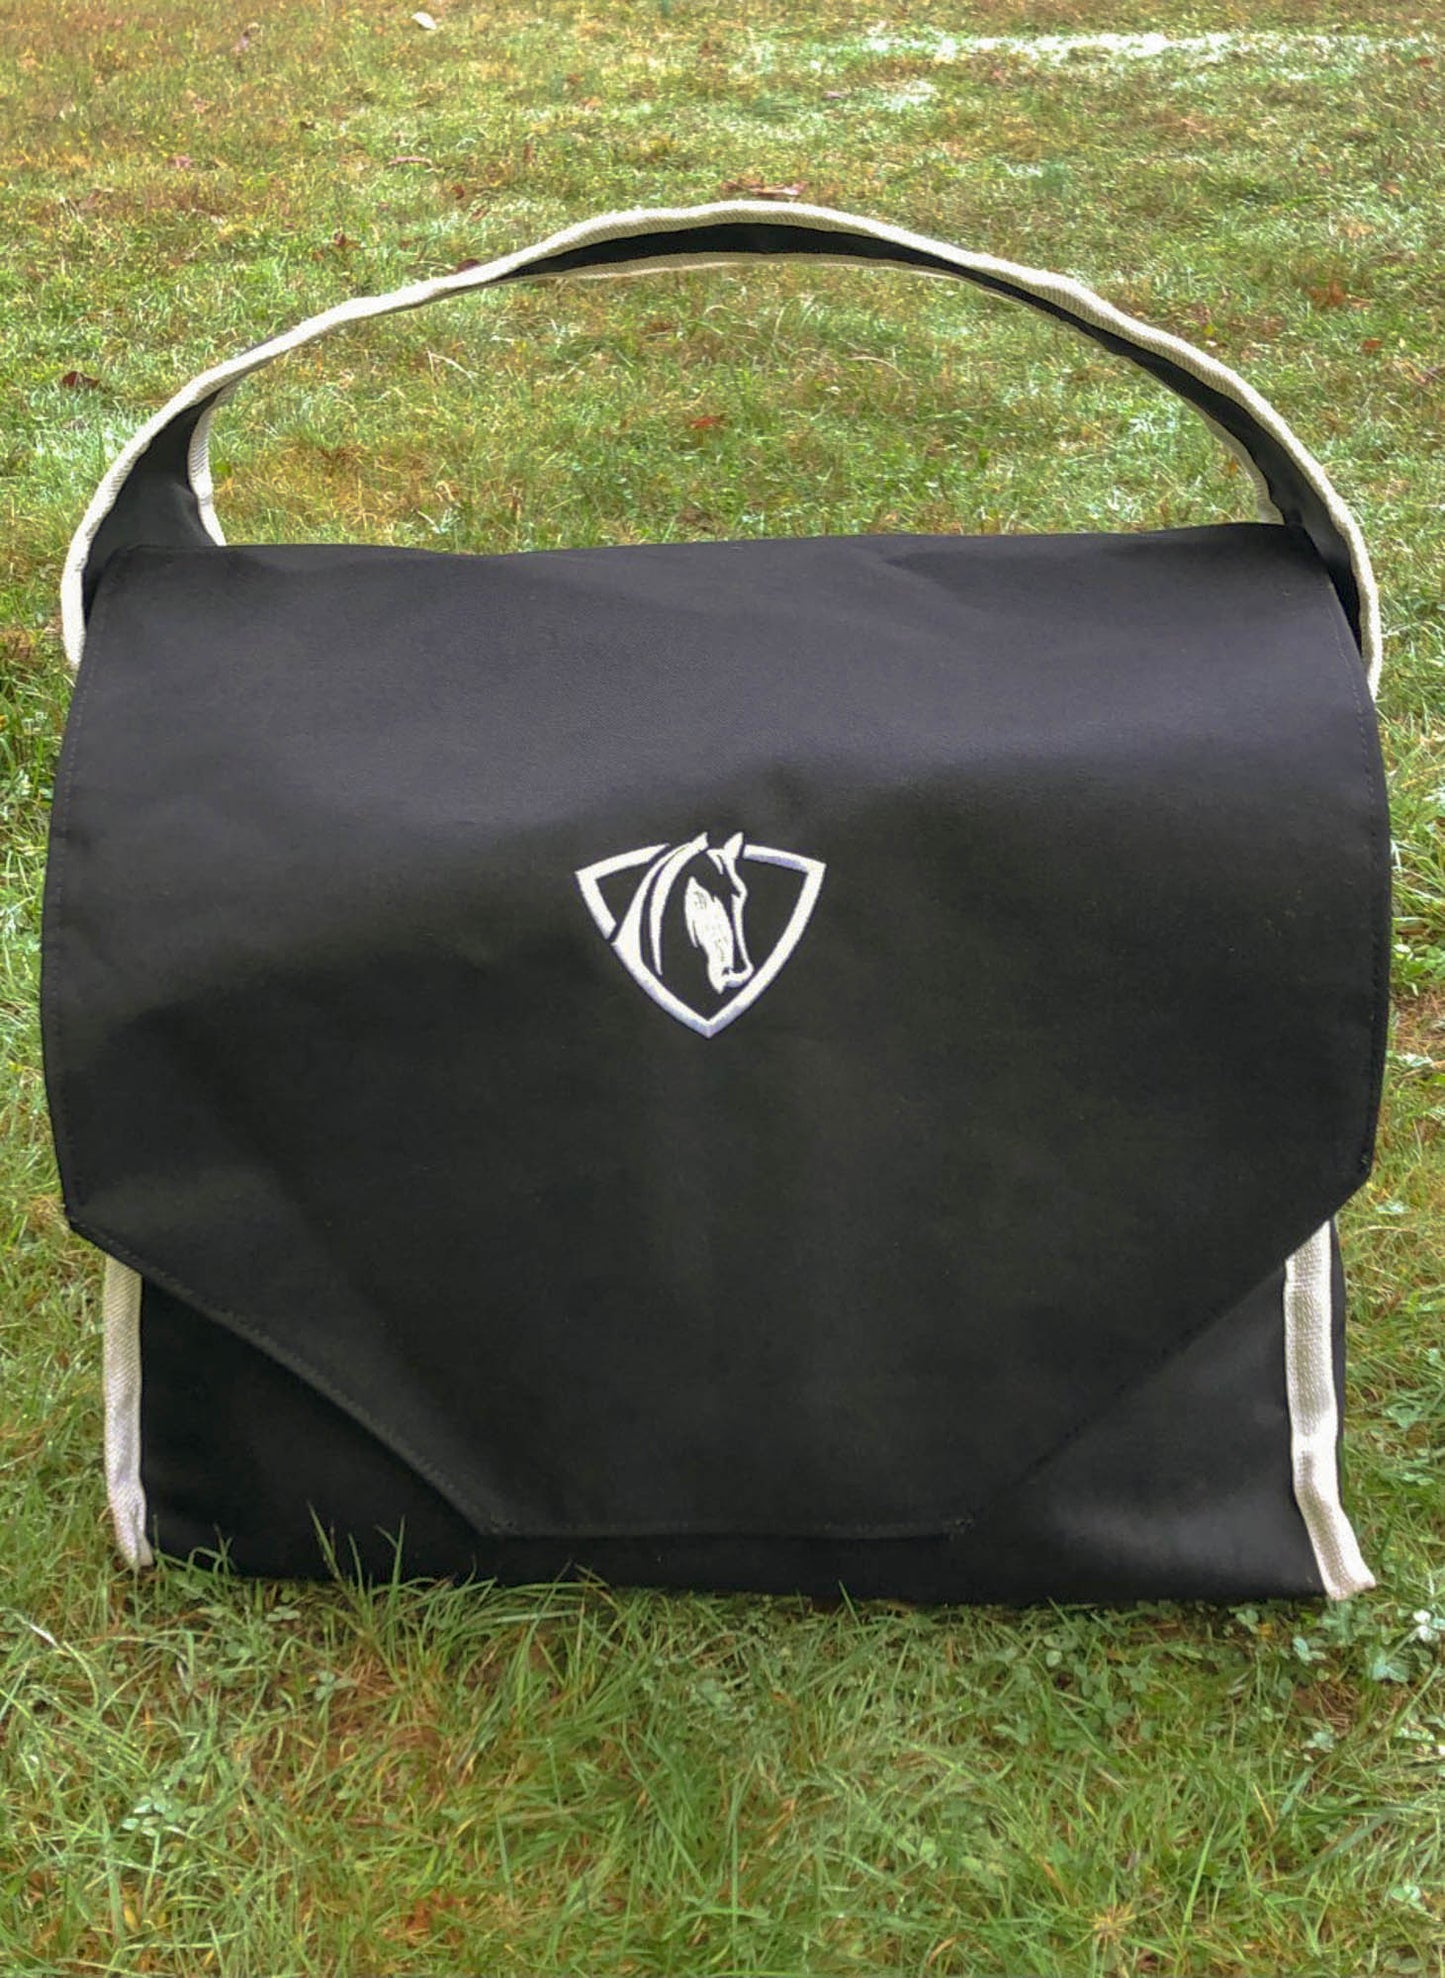 The tote bag which all Eqivests ship in